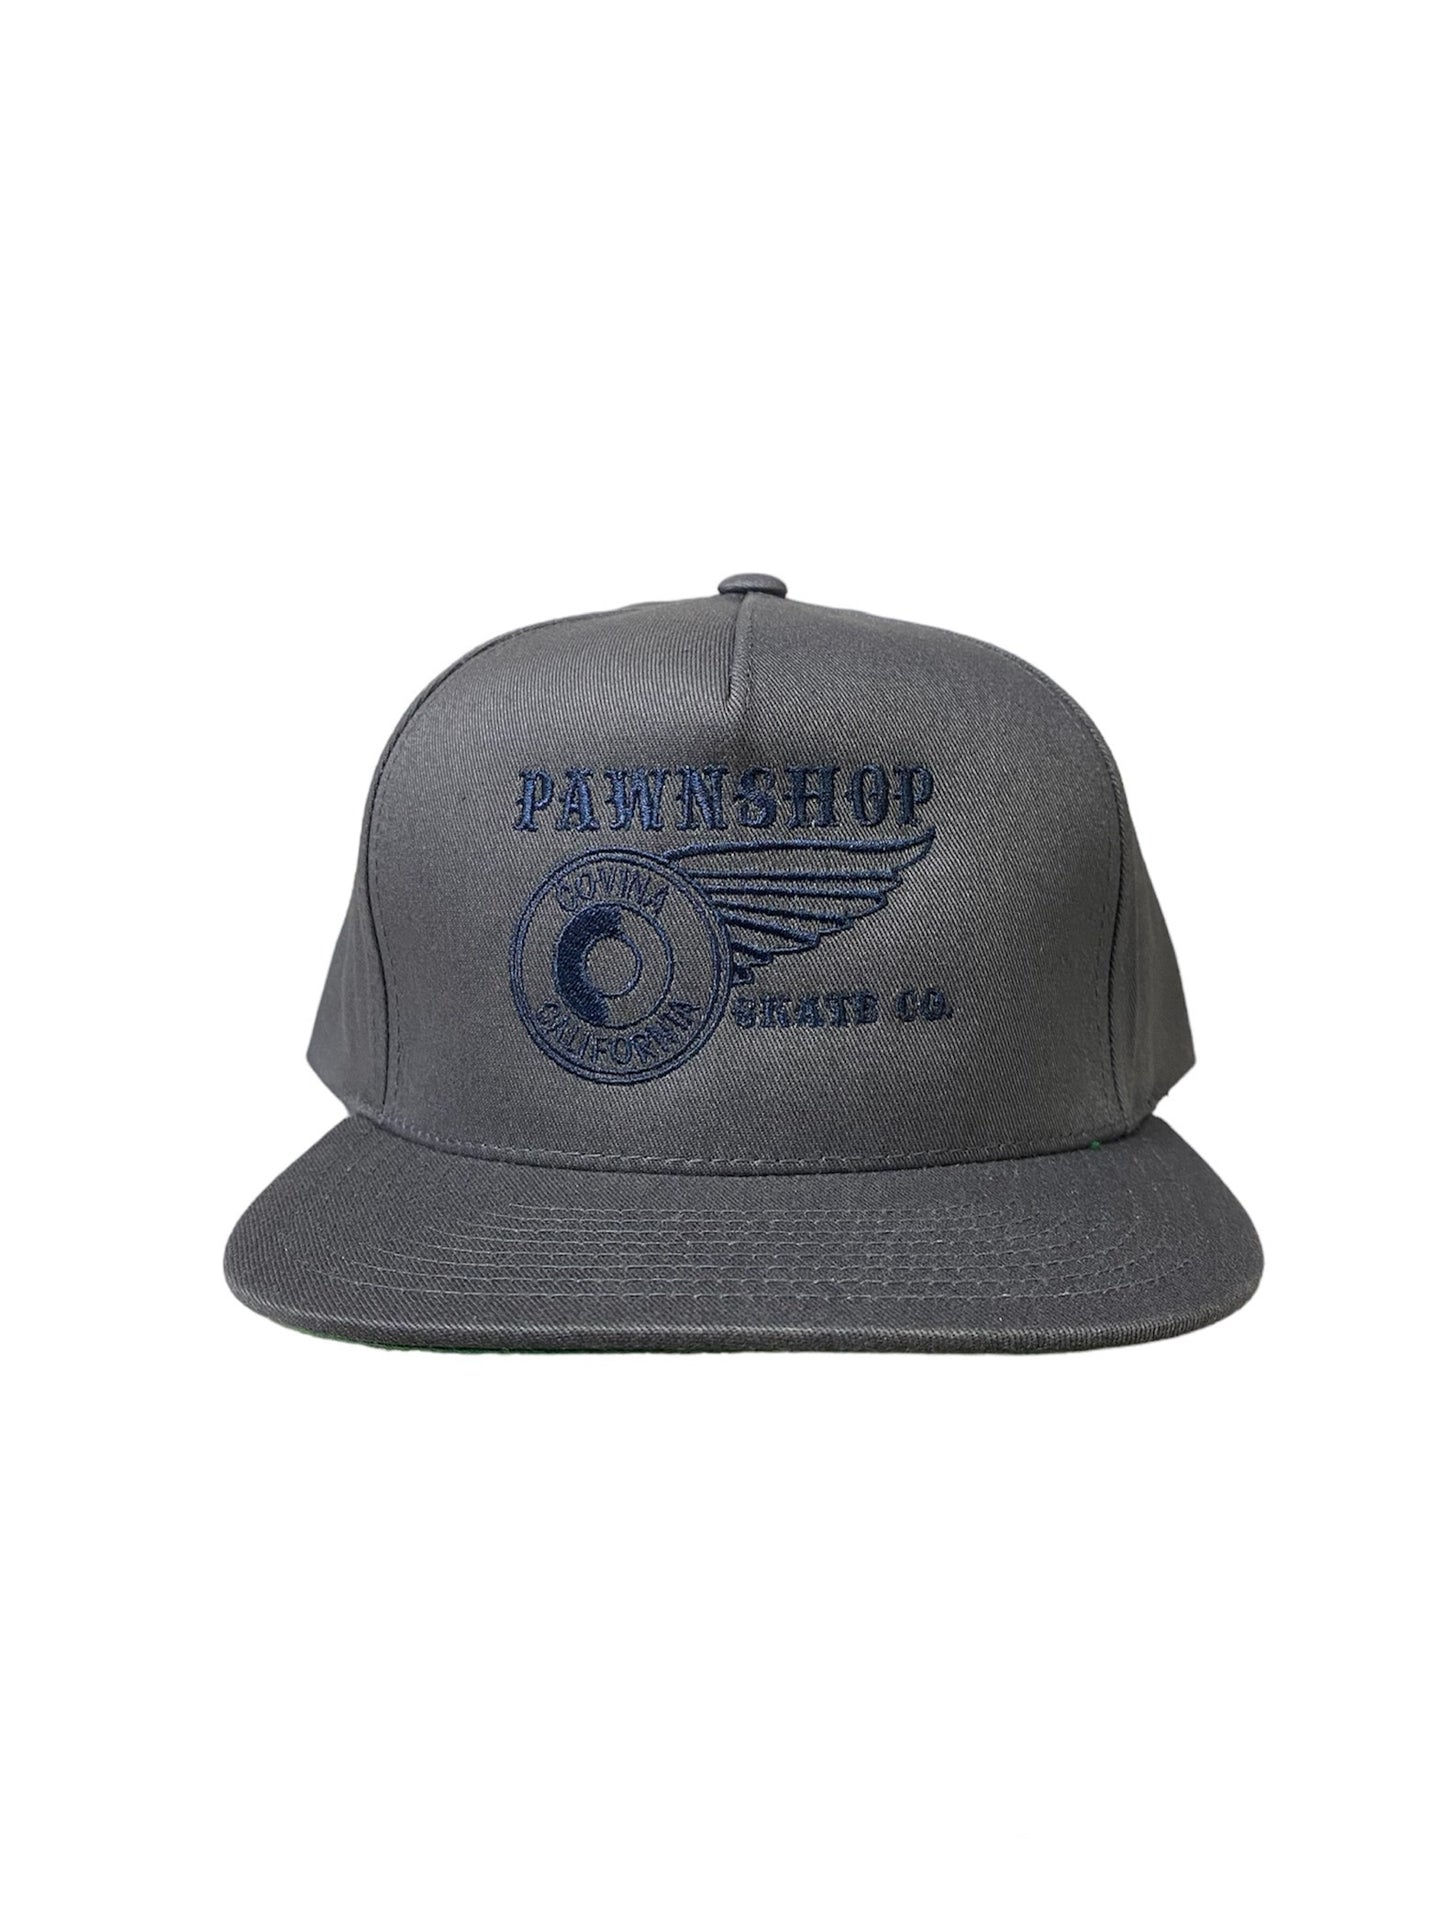 Pawnshop W&W Embroidered Classic Hat